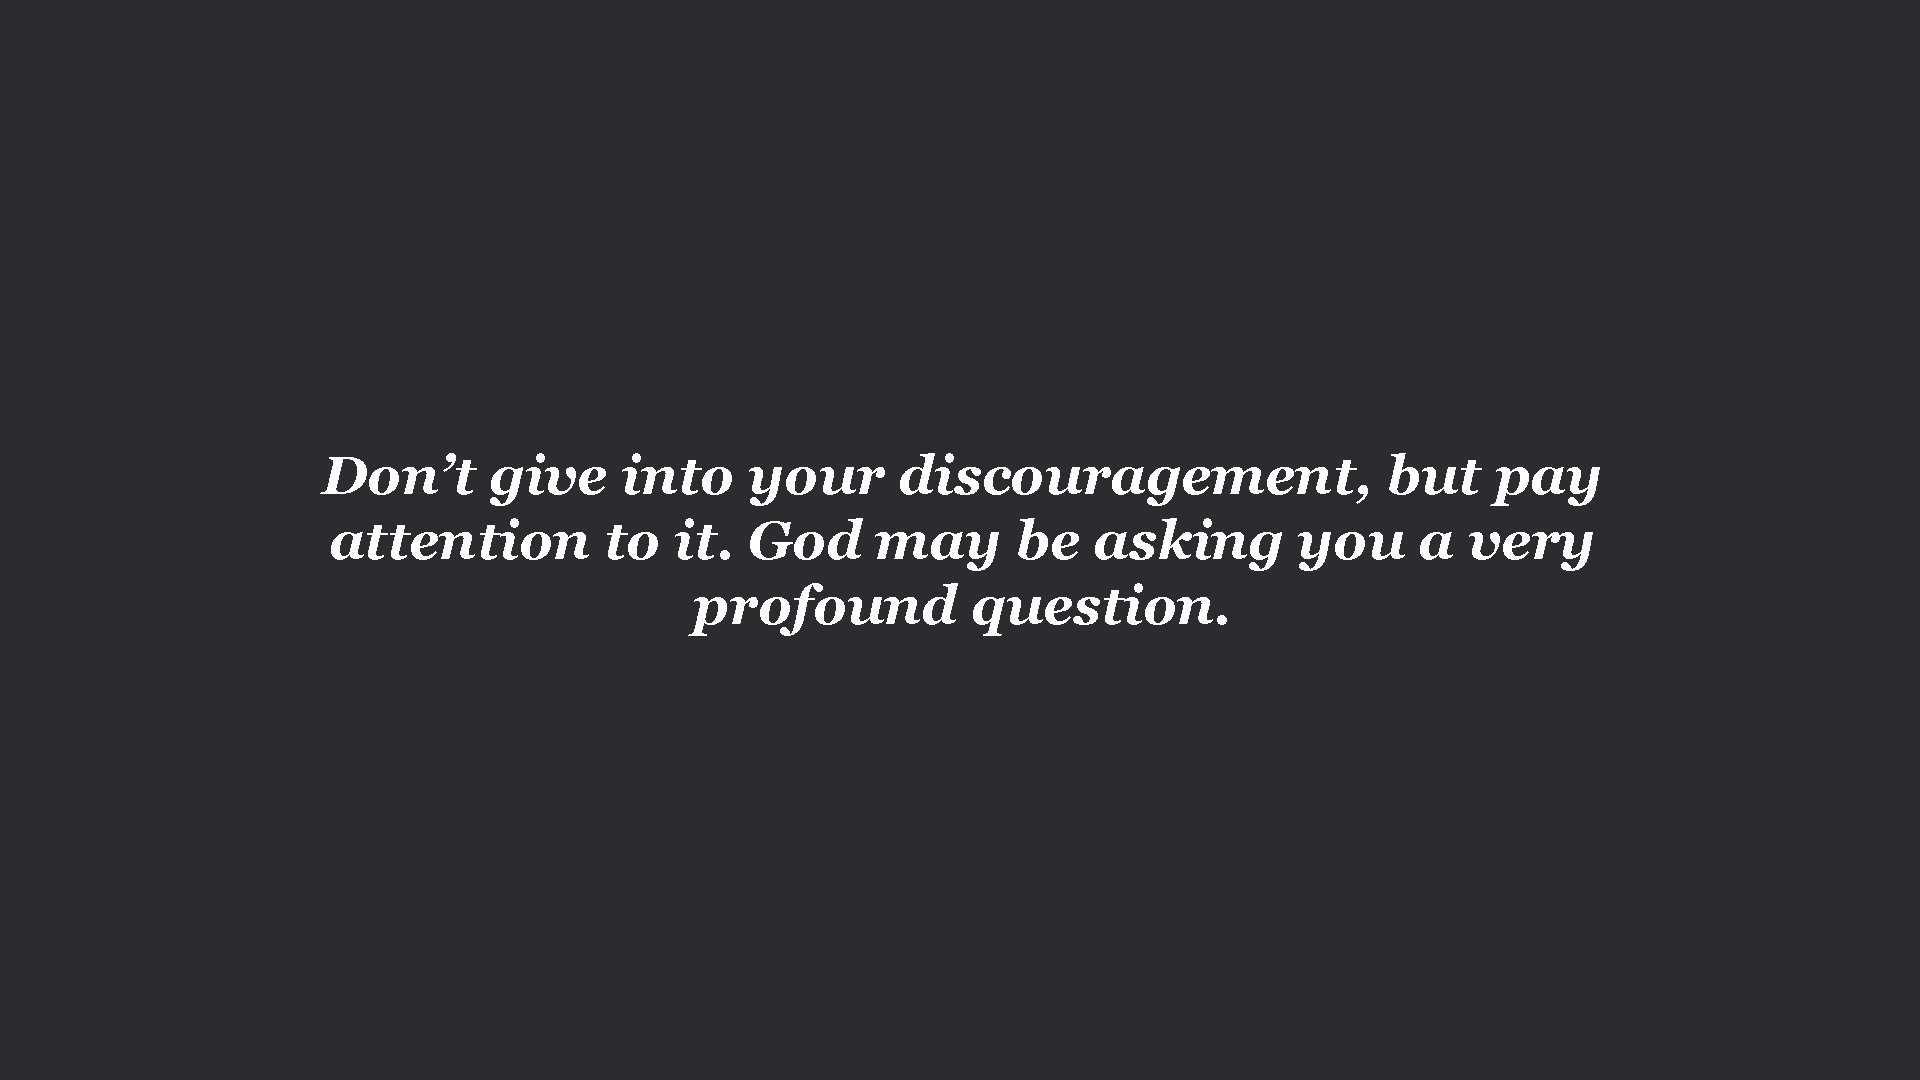 Don’t give into your discouragement, but pay attention to it. God may be asking